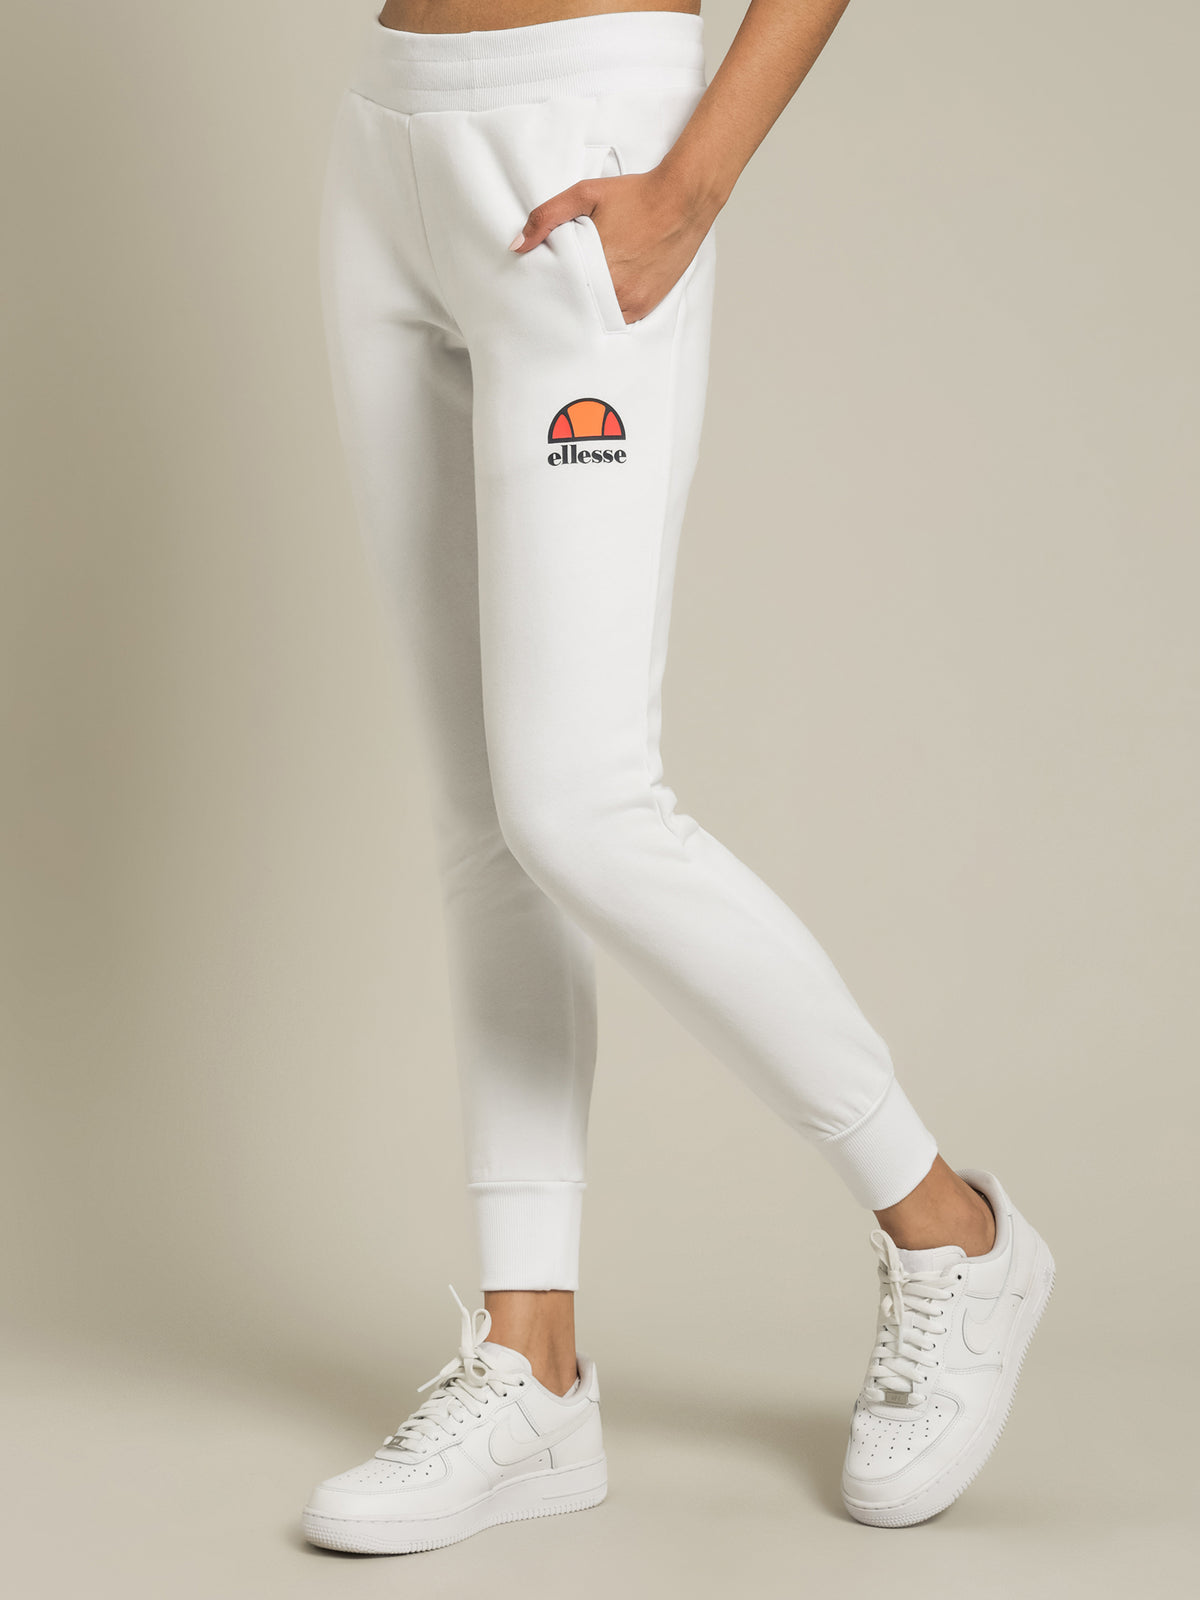 Queenstown Joggers in White